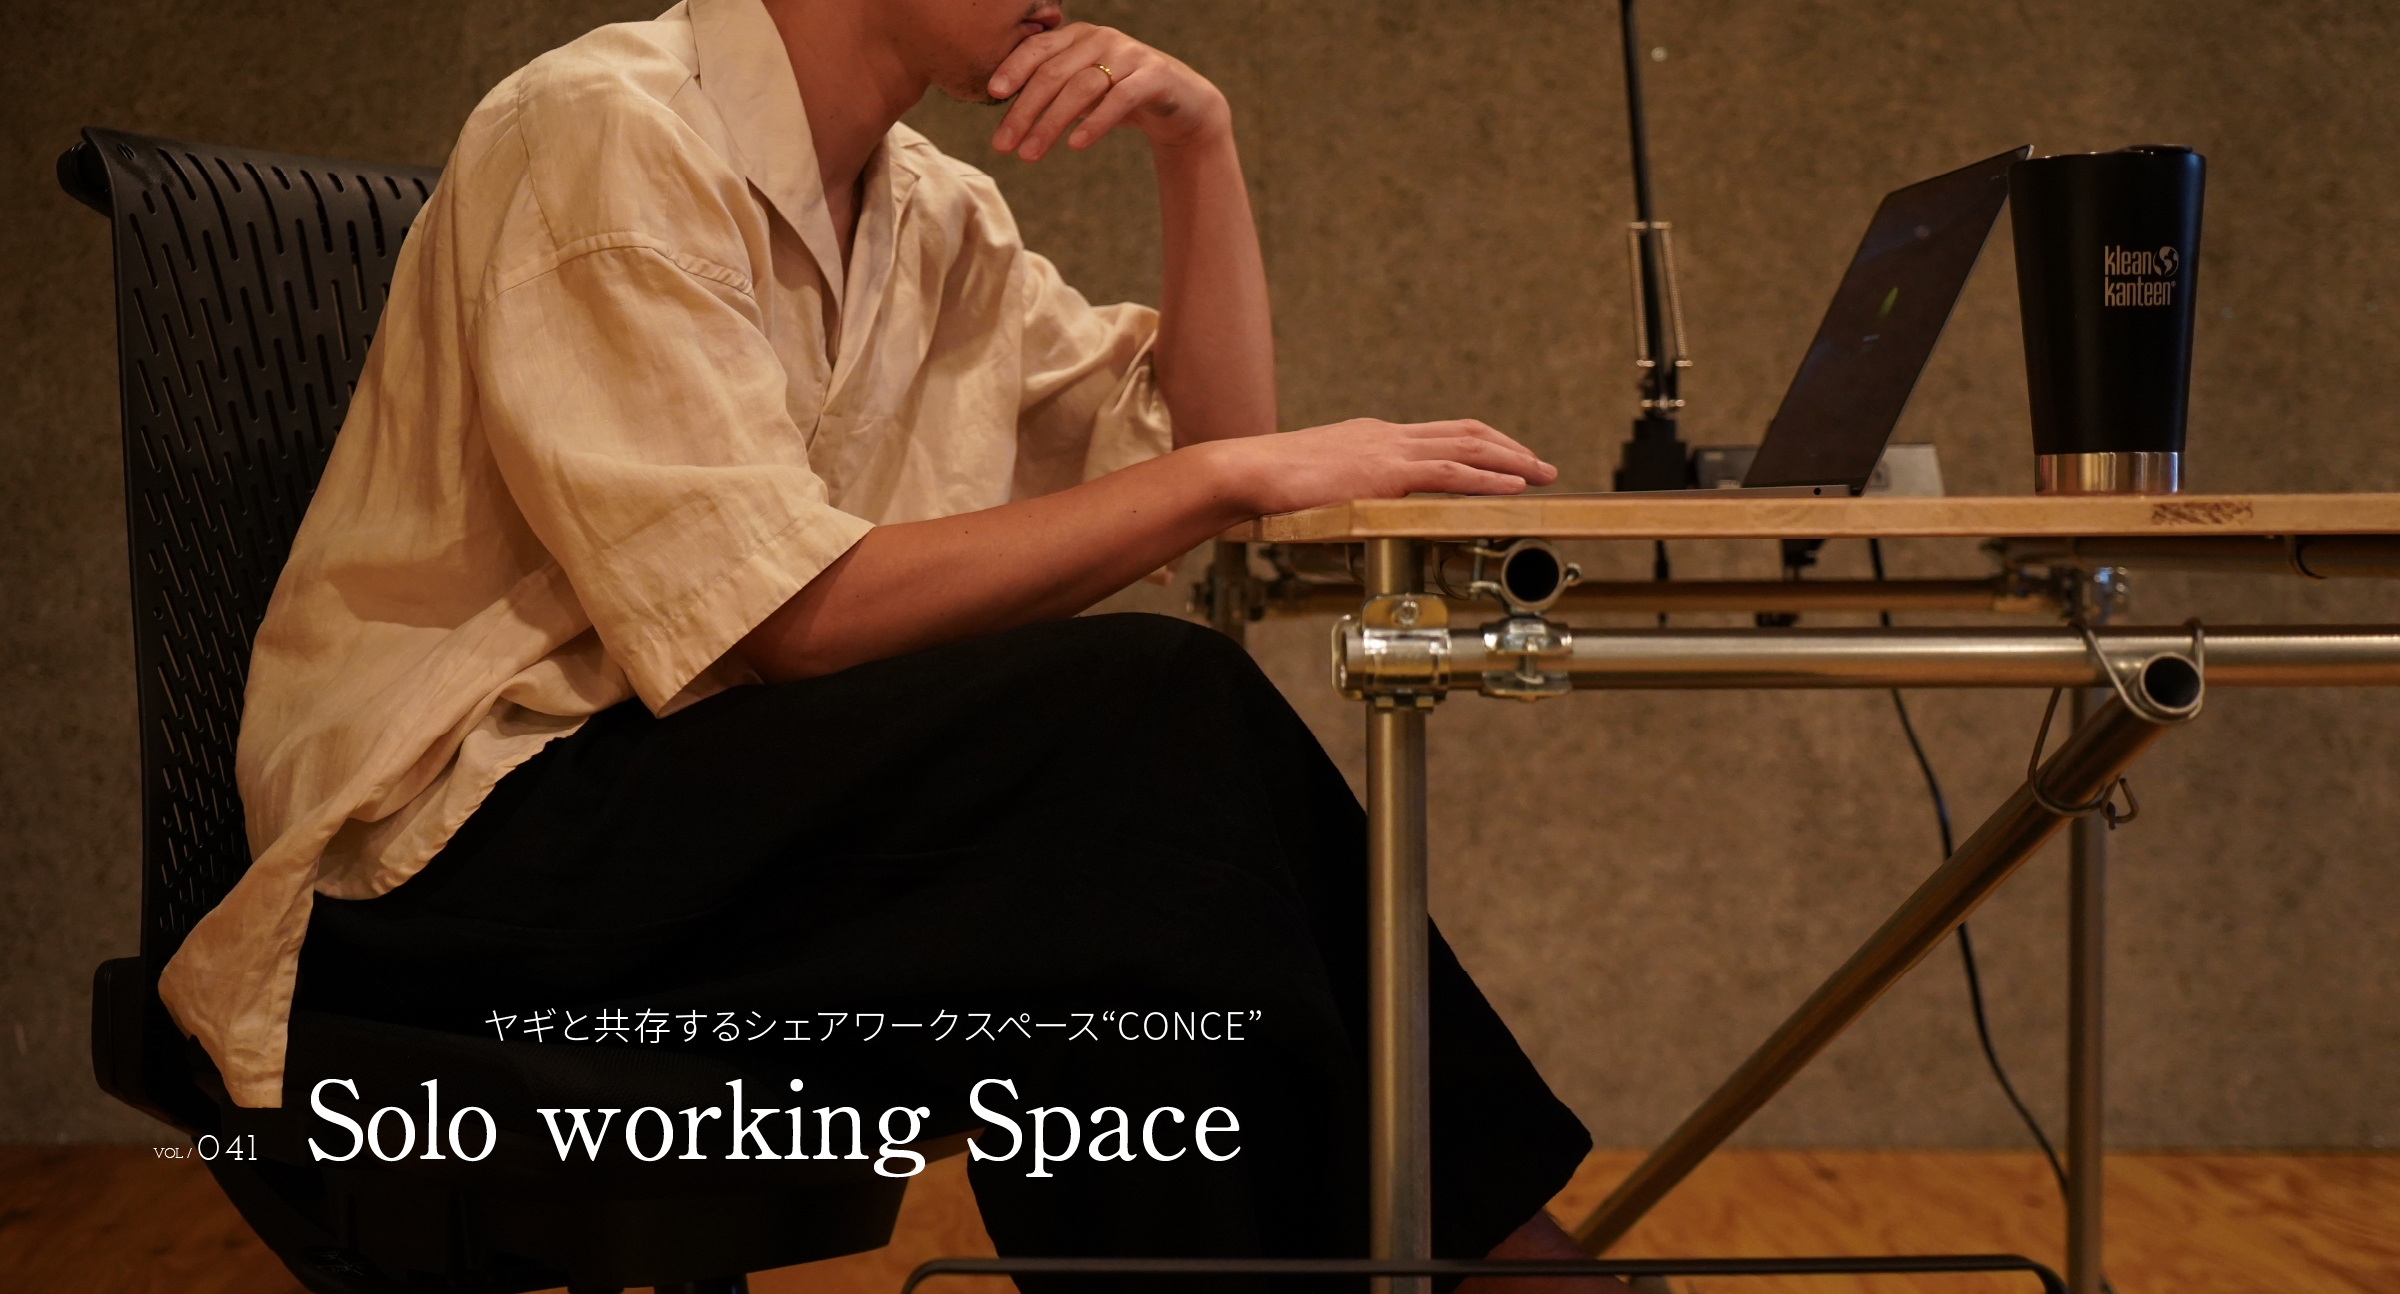 VOL / 041 Solo working Space